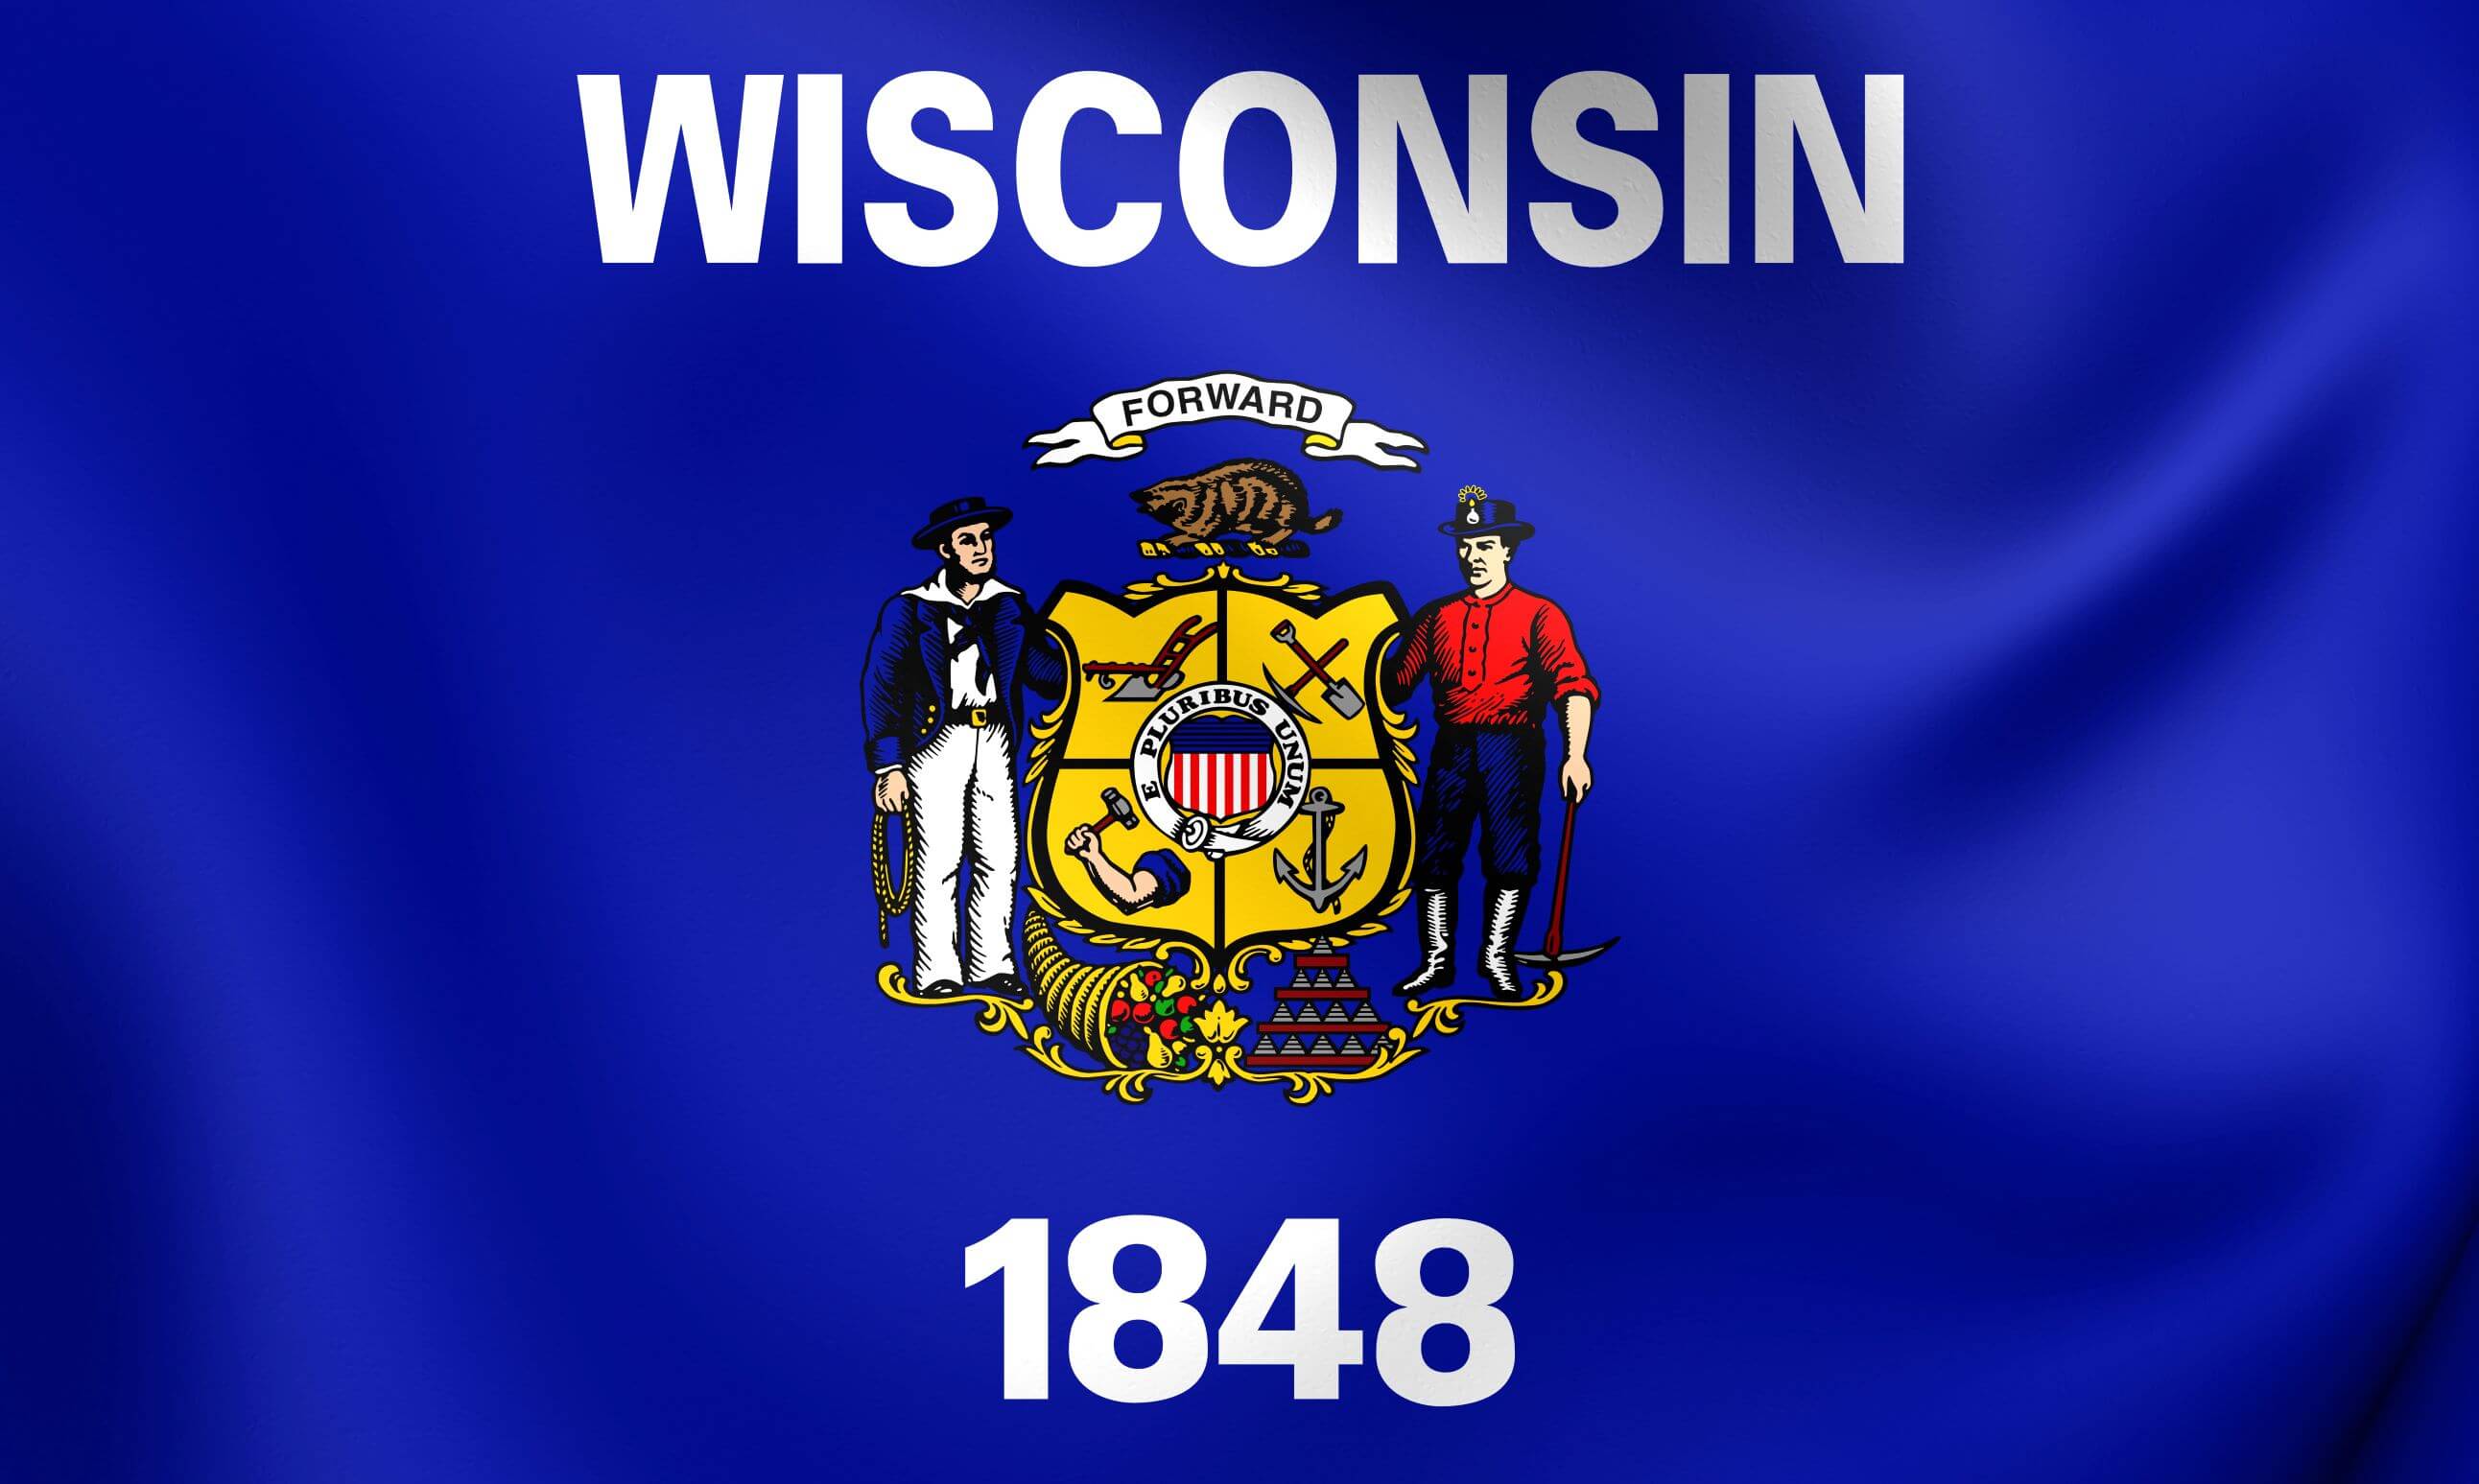 An image of the Wisconsin state flag.